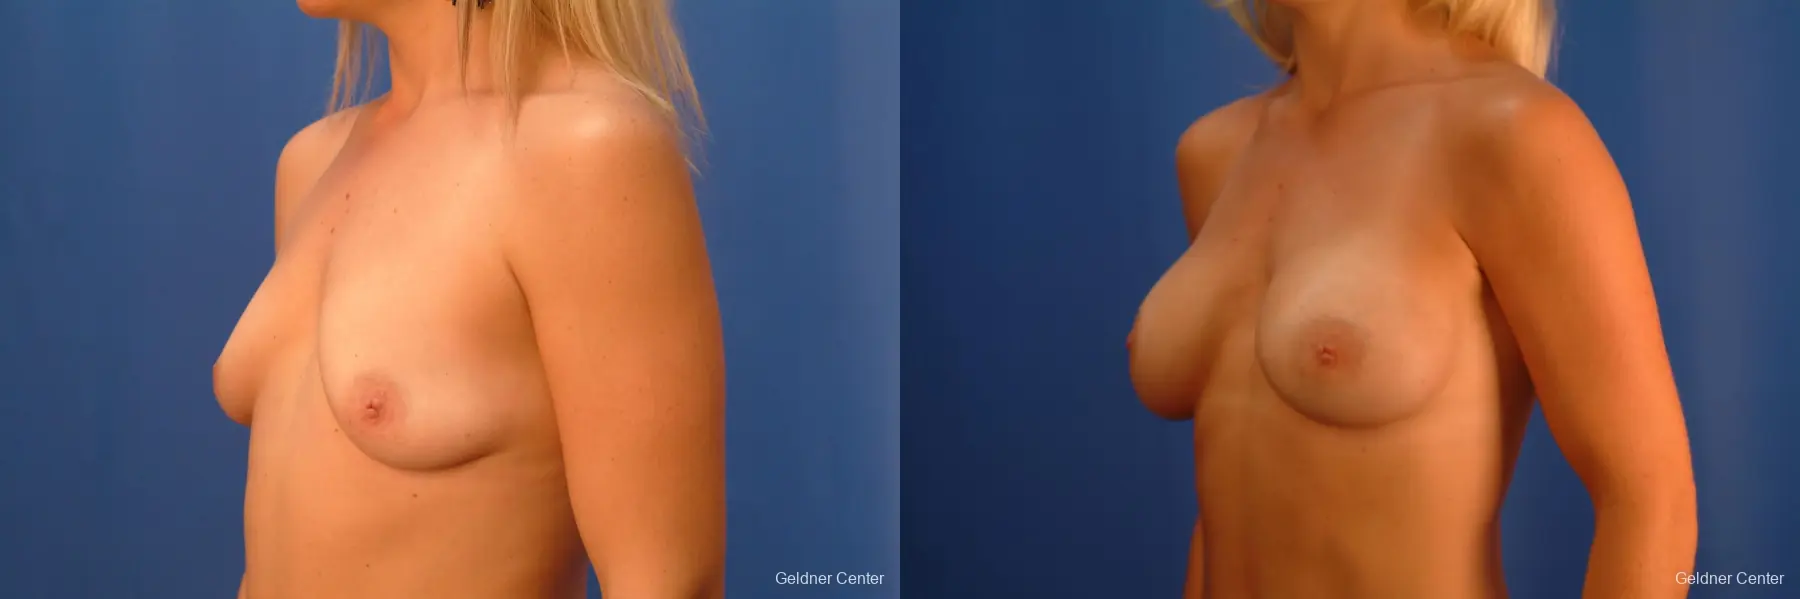 Breast Augmentation Lake Shore Dr, Chicago 2350 - Before and After 4